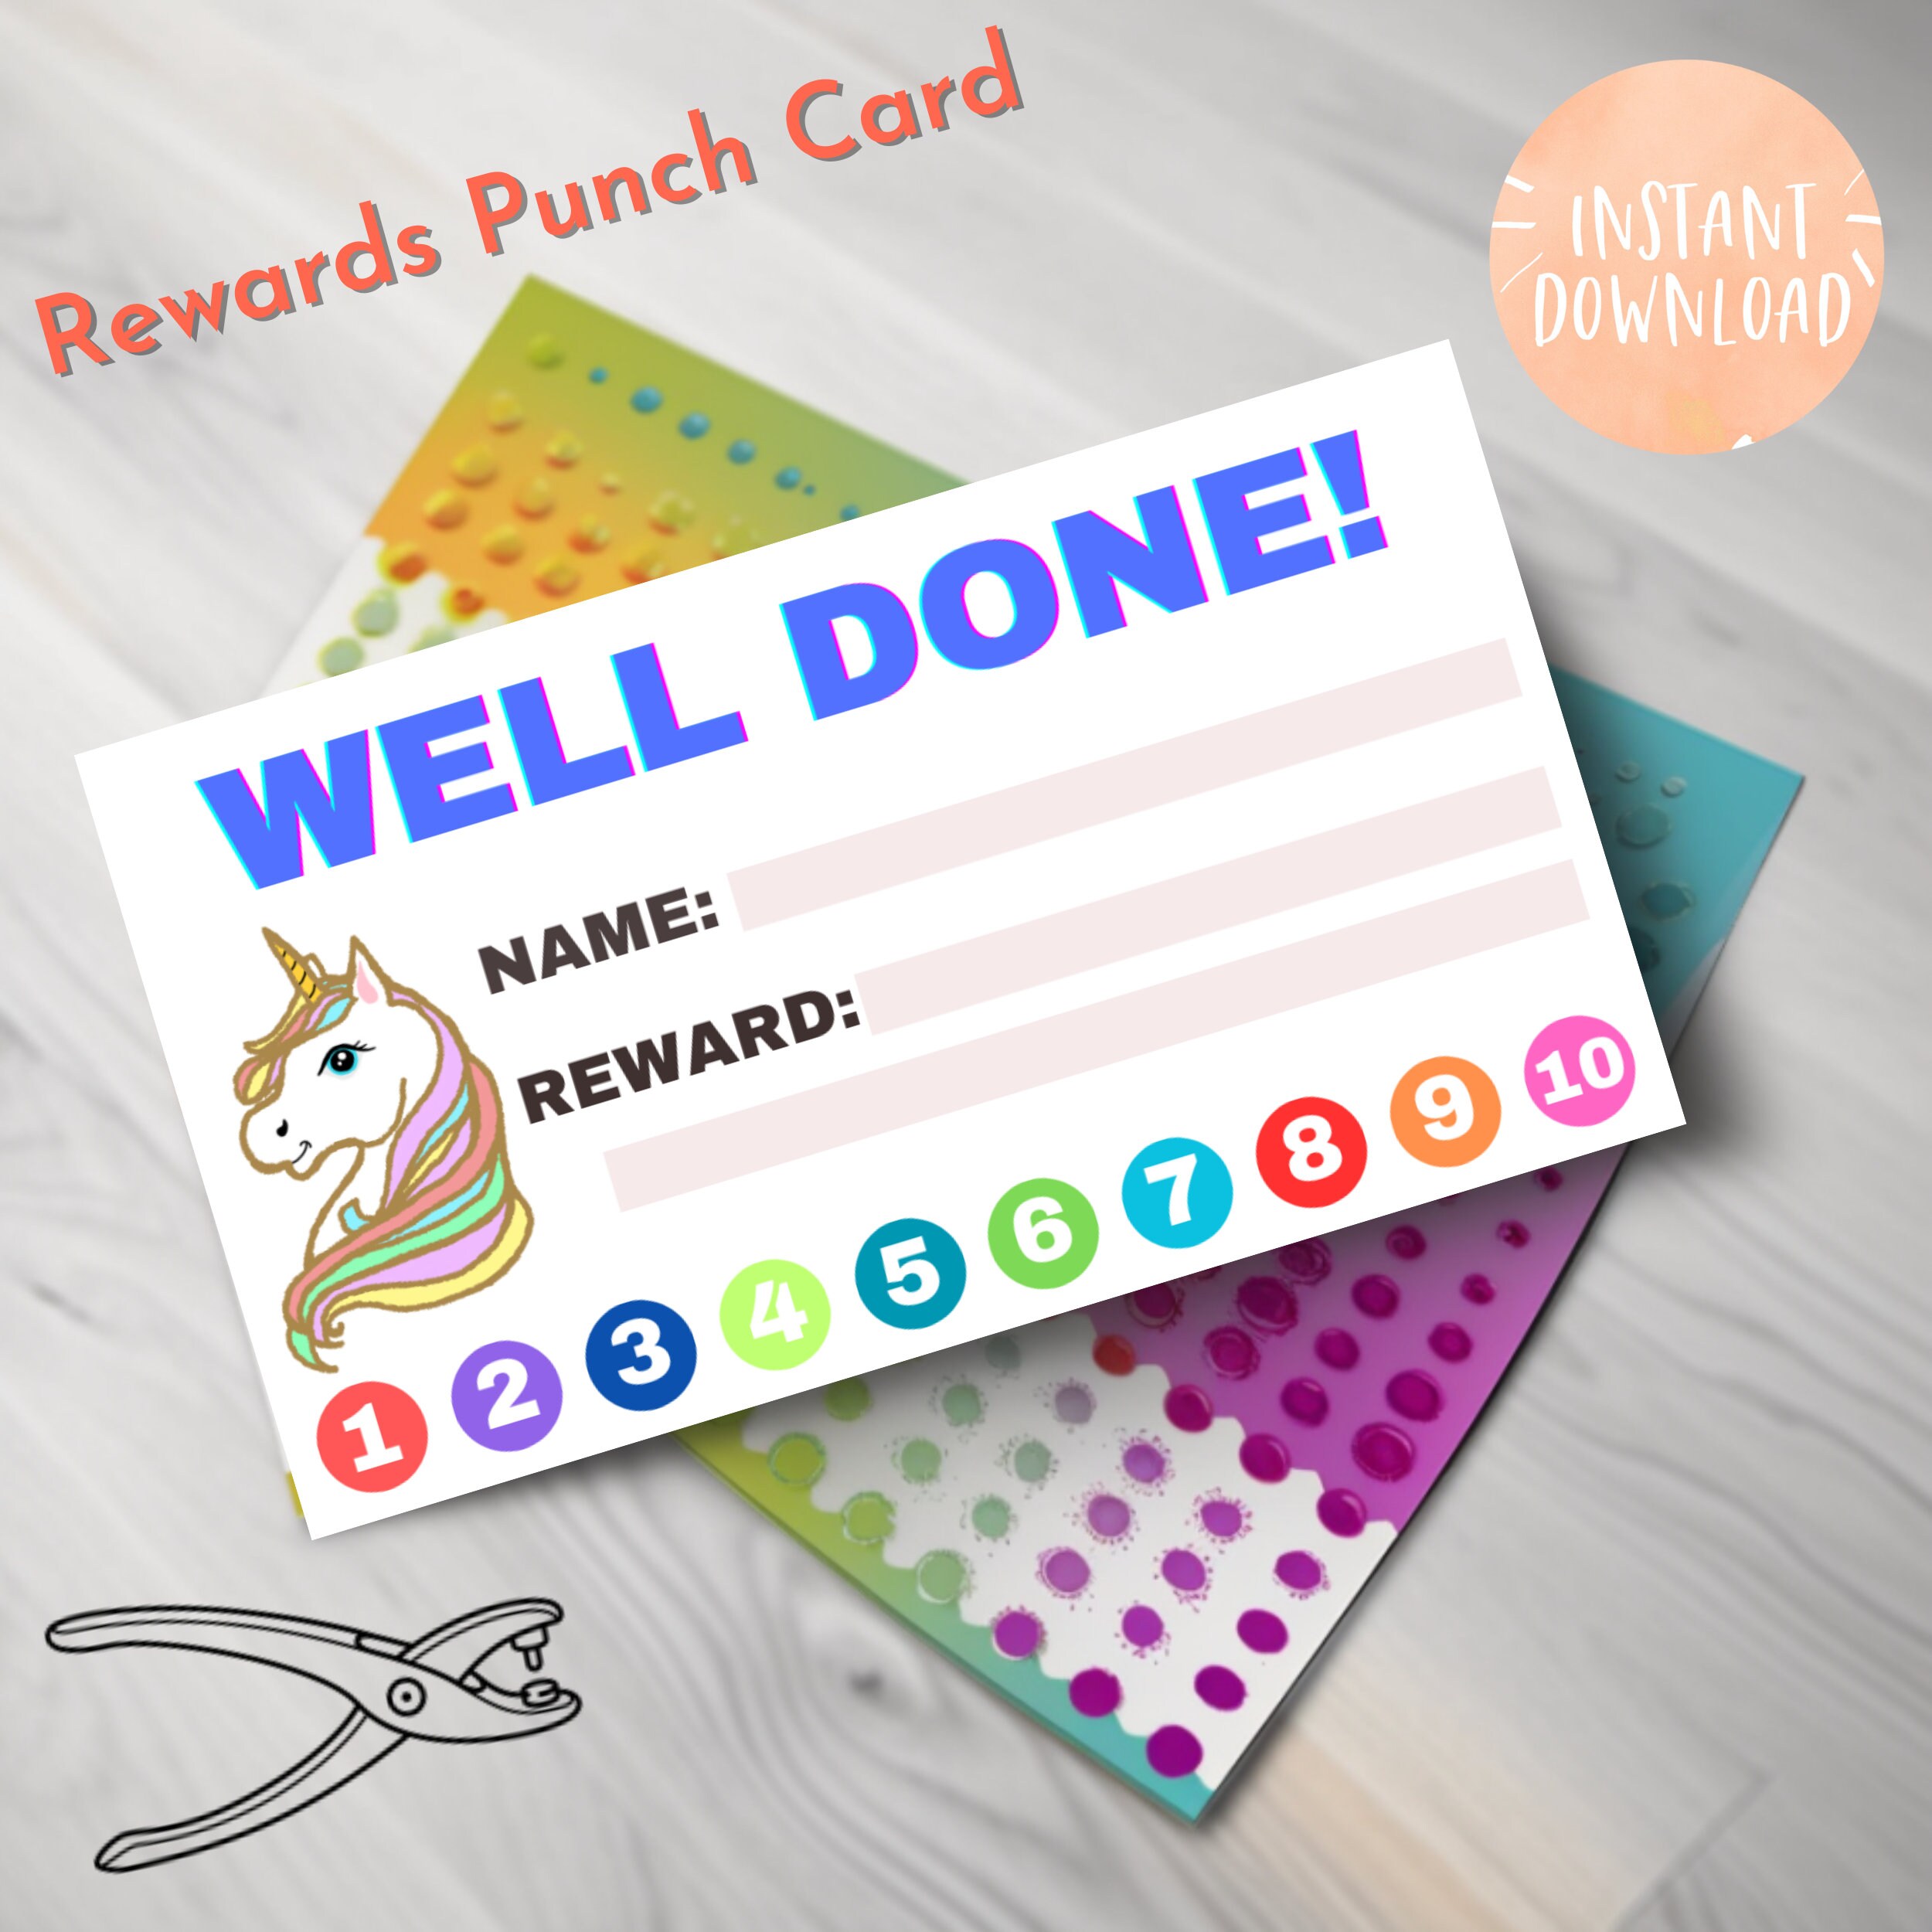 200 Pcs Behavior Punch Cards with Hole Puncher for Kids, Rainbow Theme  Reward Chart Cards to